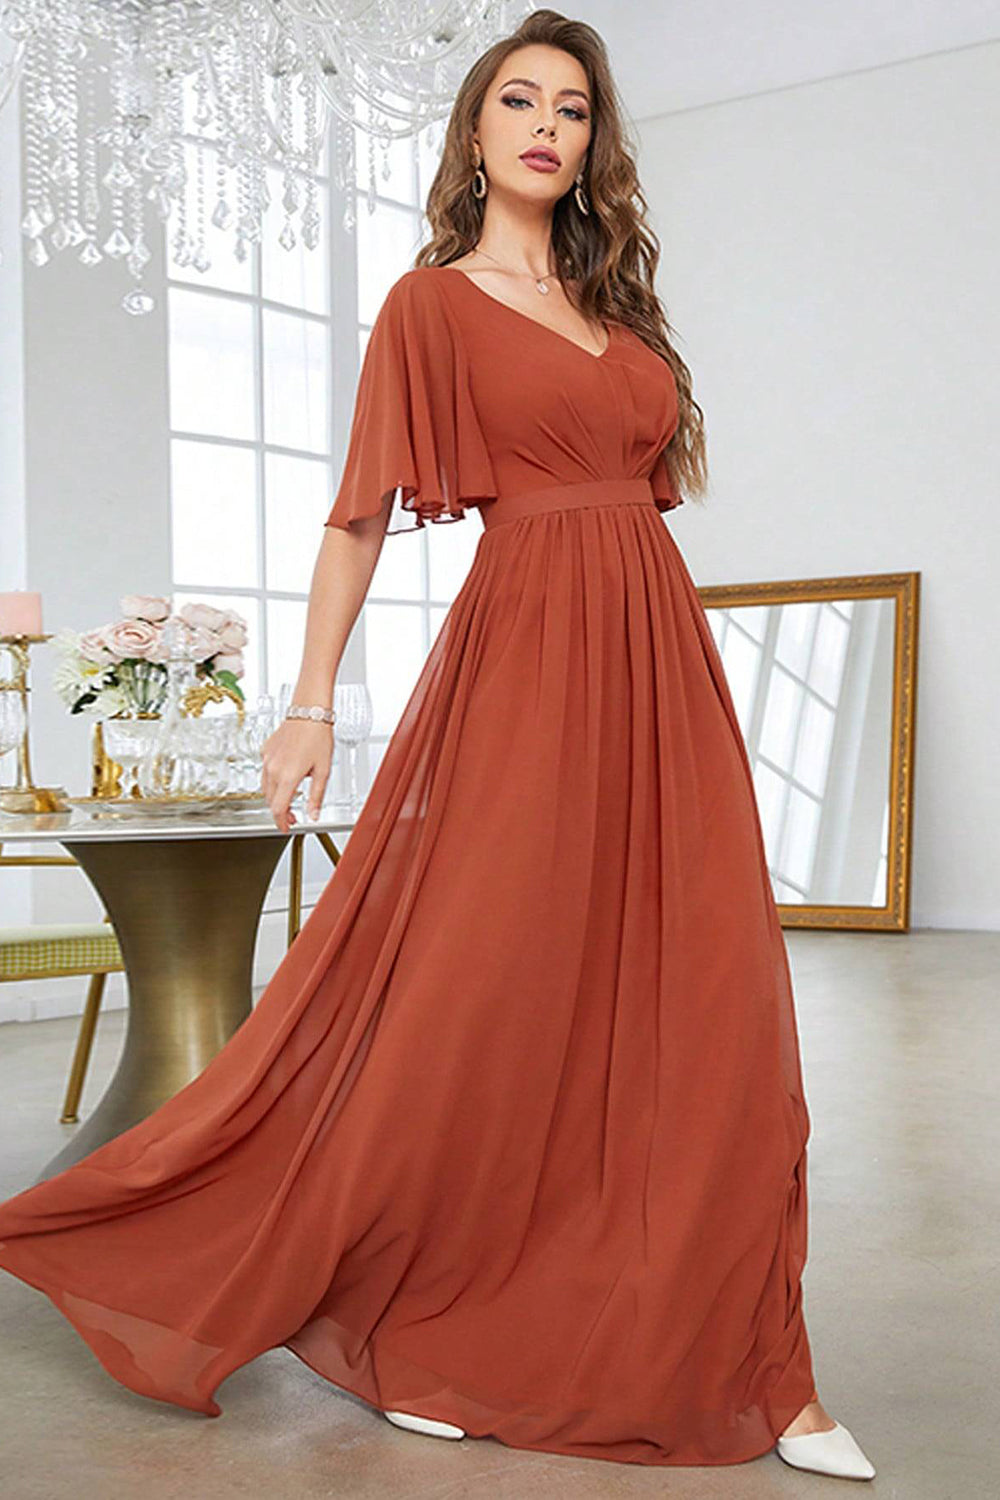 Brick Red A-Line V-Neck Pleated Formal Dress With Short Sleeves